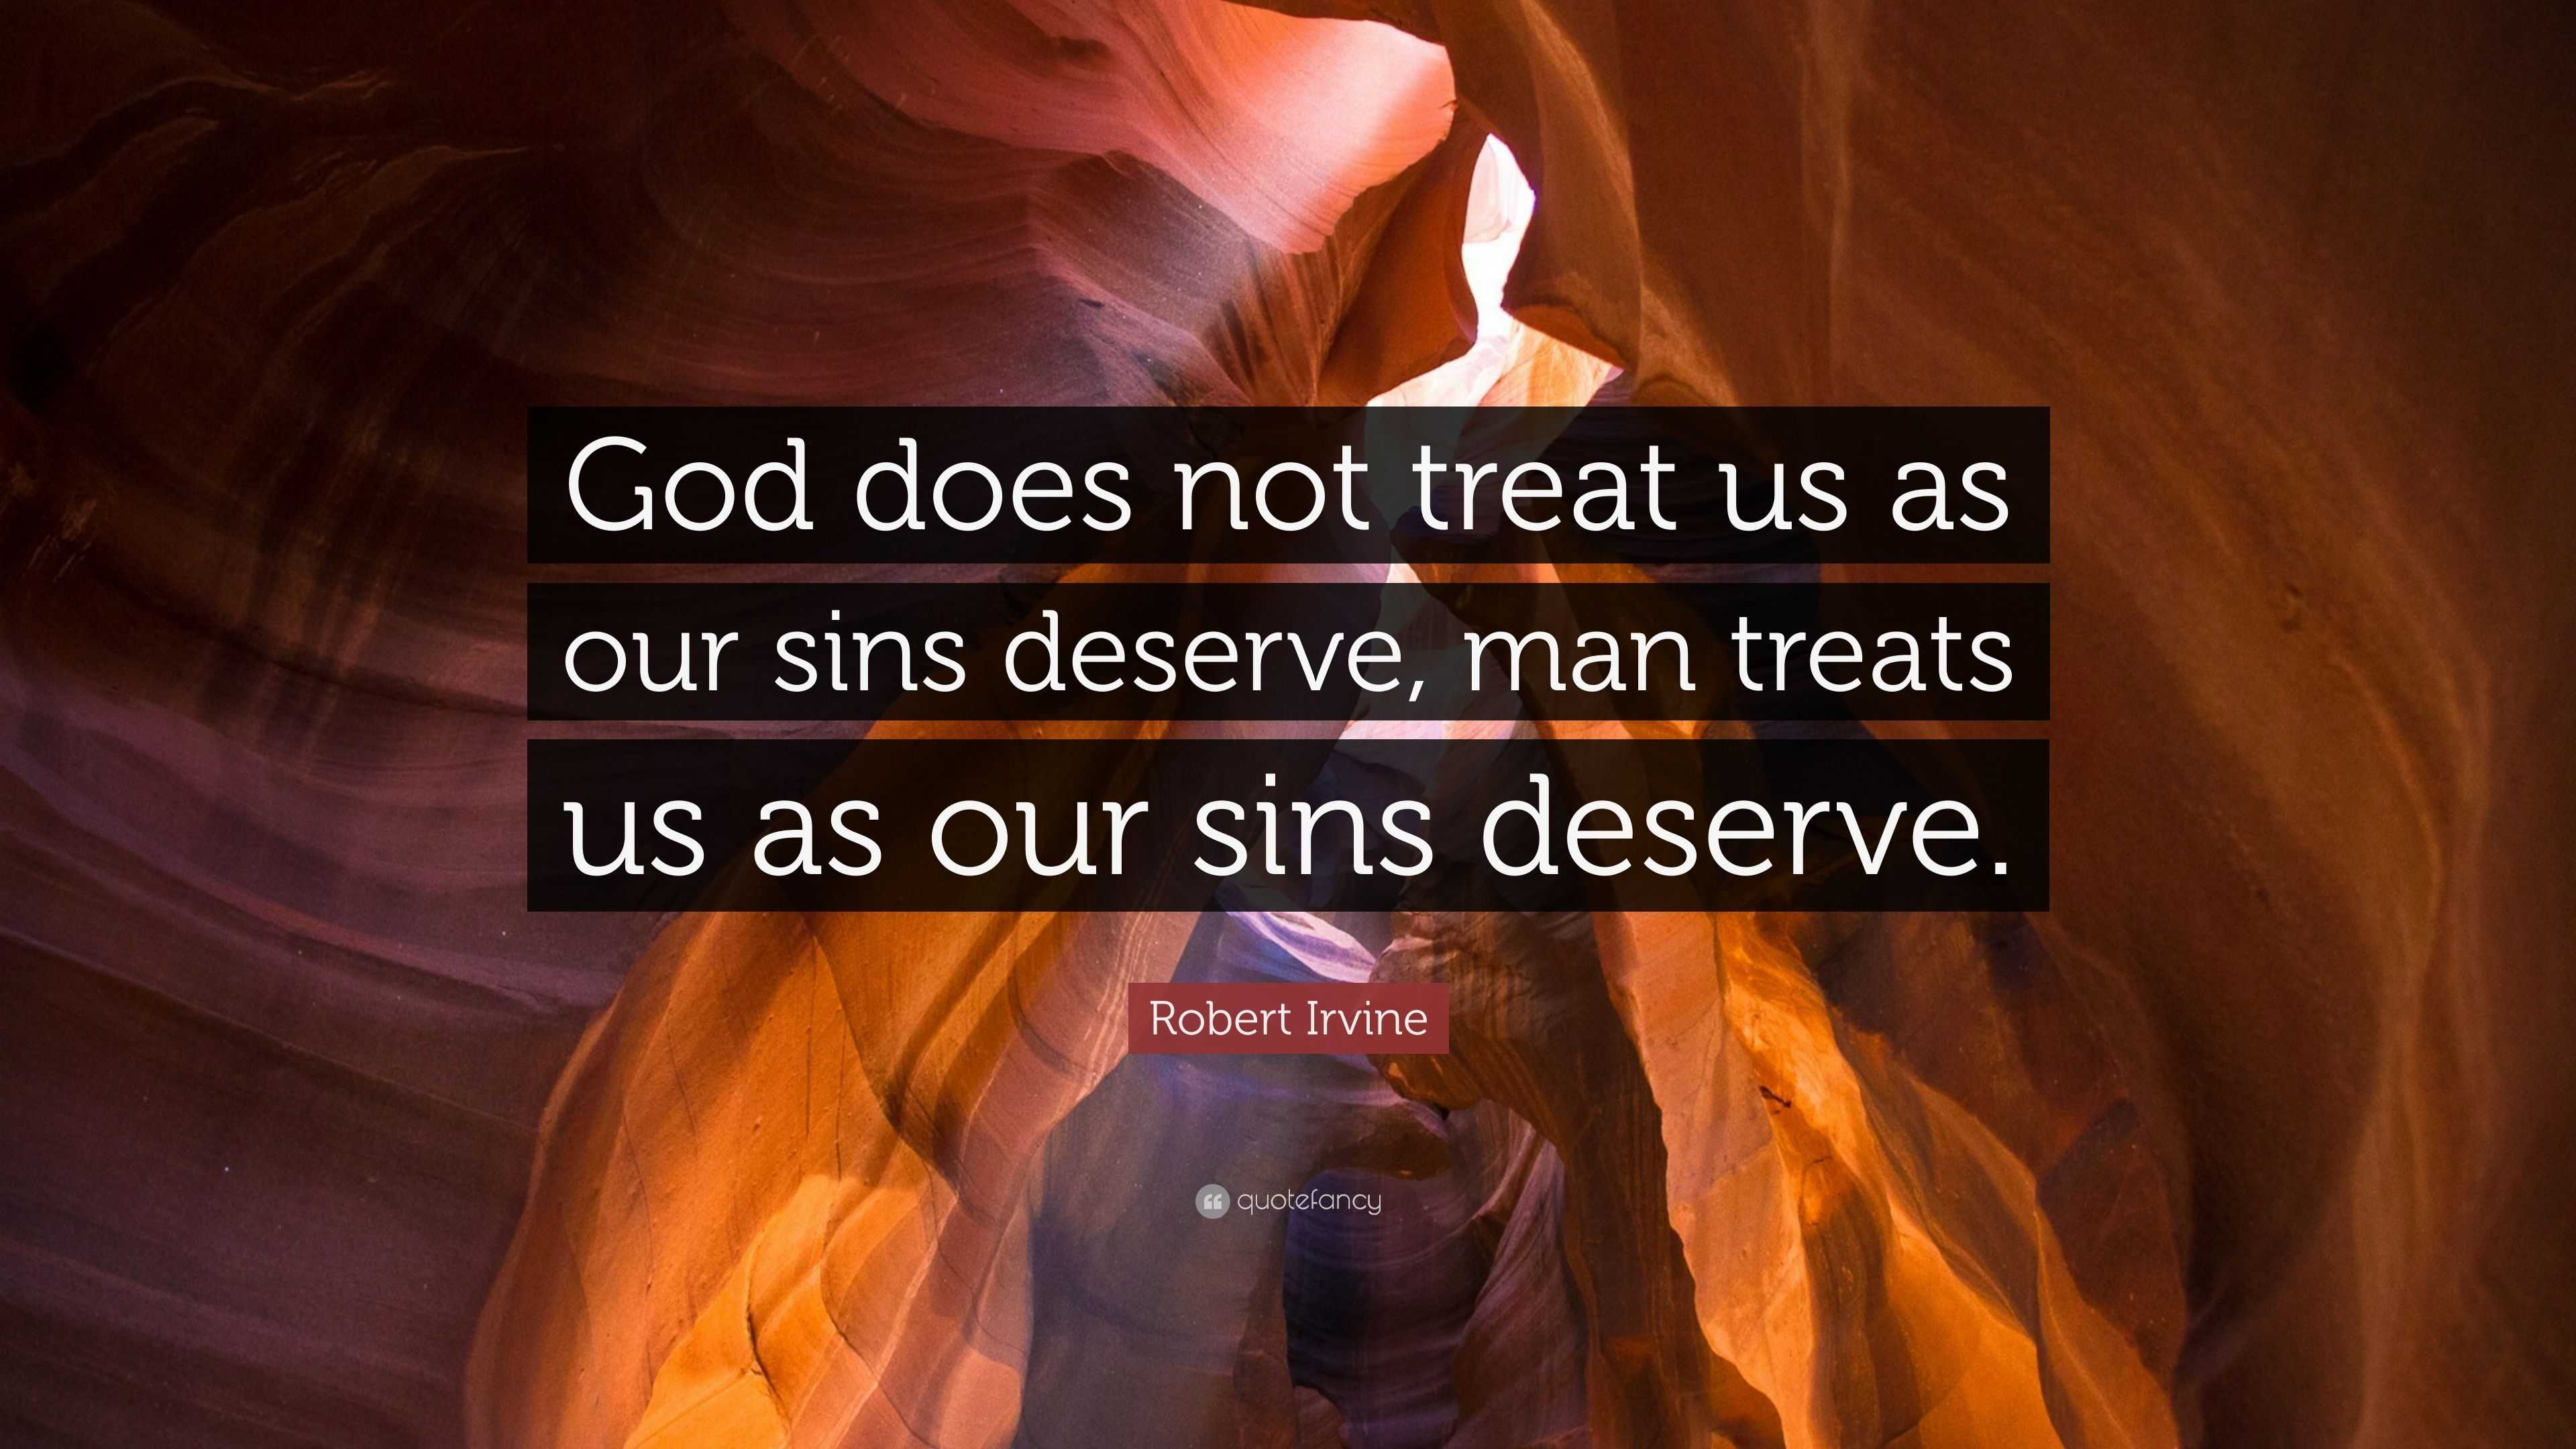 4636513 Robert Irvine Quote God Does Not Treat Us As Our Sins Deserve Man 